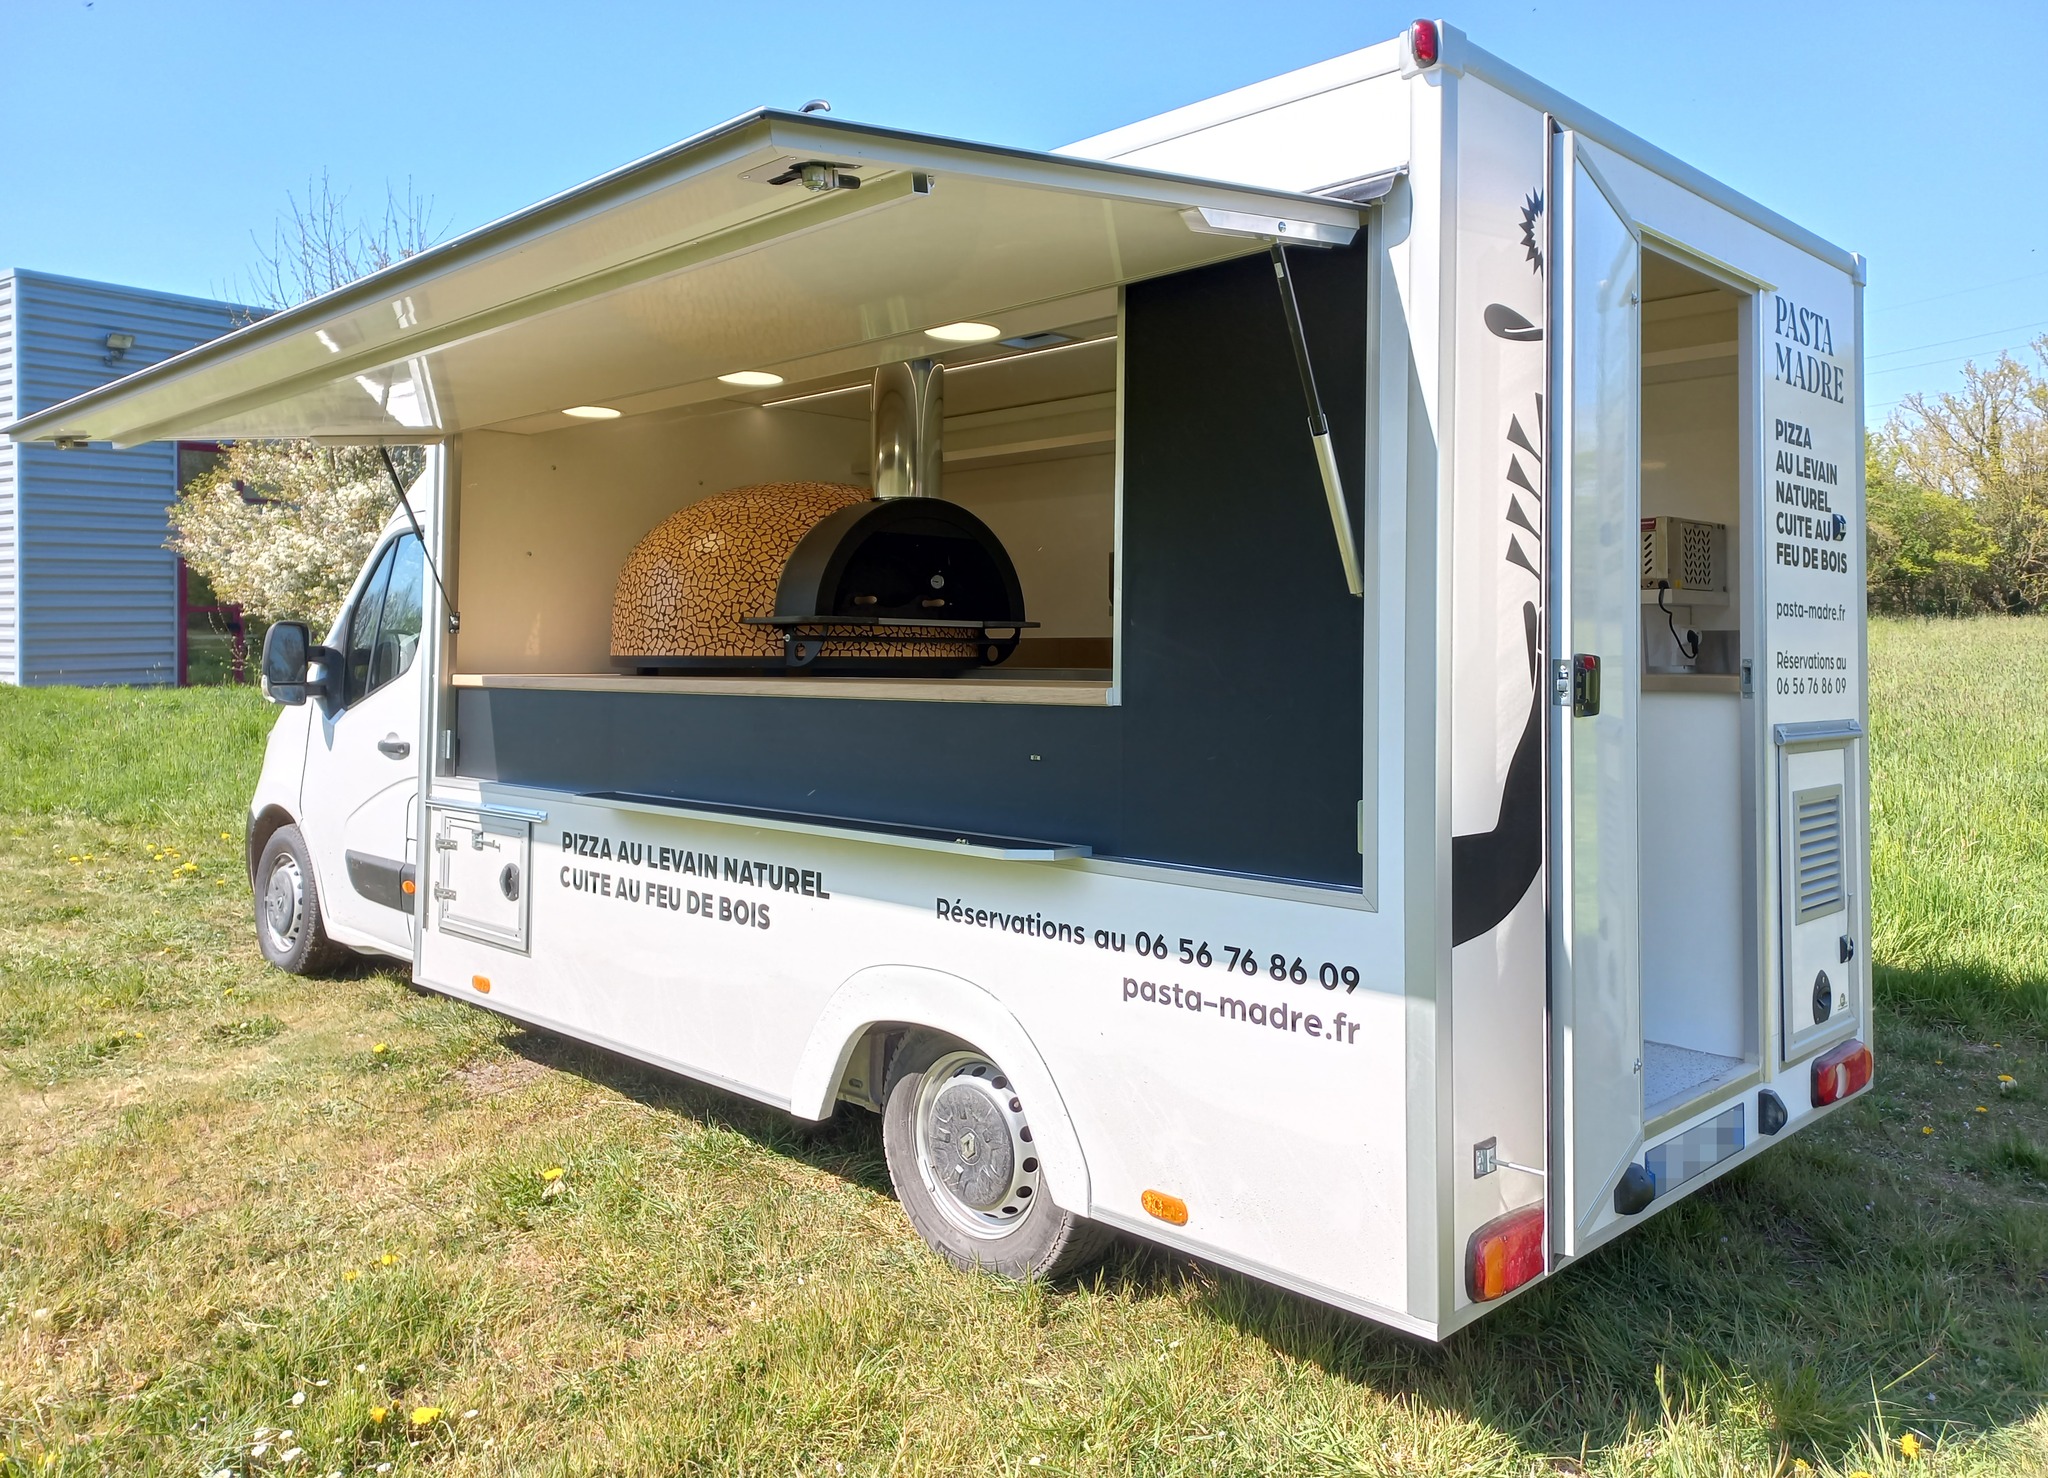 Camion Renault pizza mobile Camion pizza www.ecomag-france.fr 6